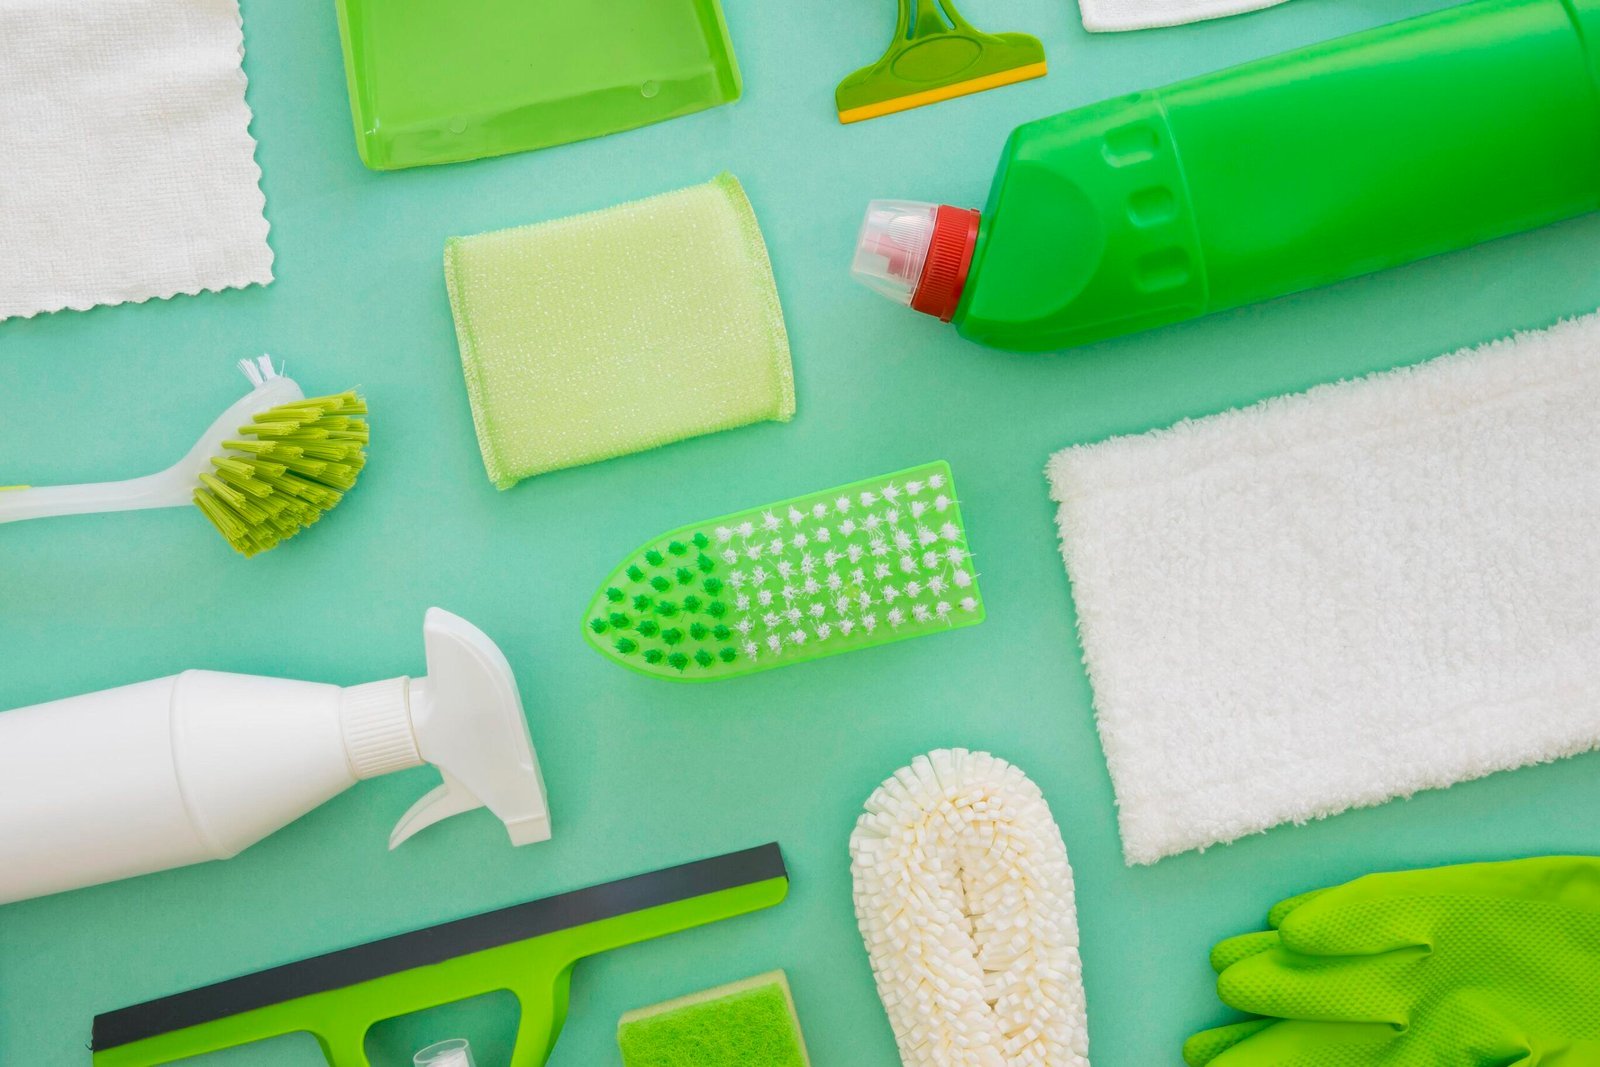 A selection of green cleaning supplies laid out on a turquoise background, including a green bottle of liquid cleaner, sponges, scrub brushes, cloths, a squeeze bottle, a mop head, and rubber gloves.